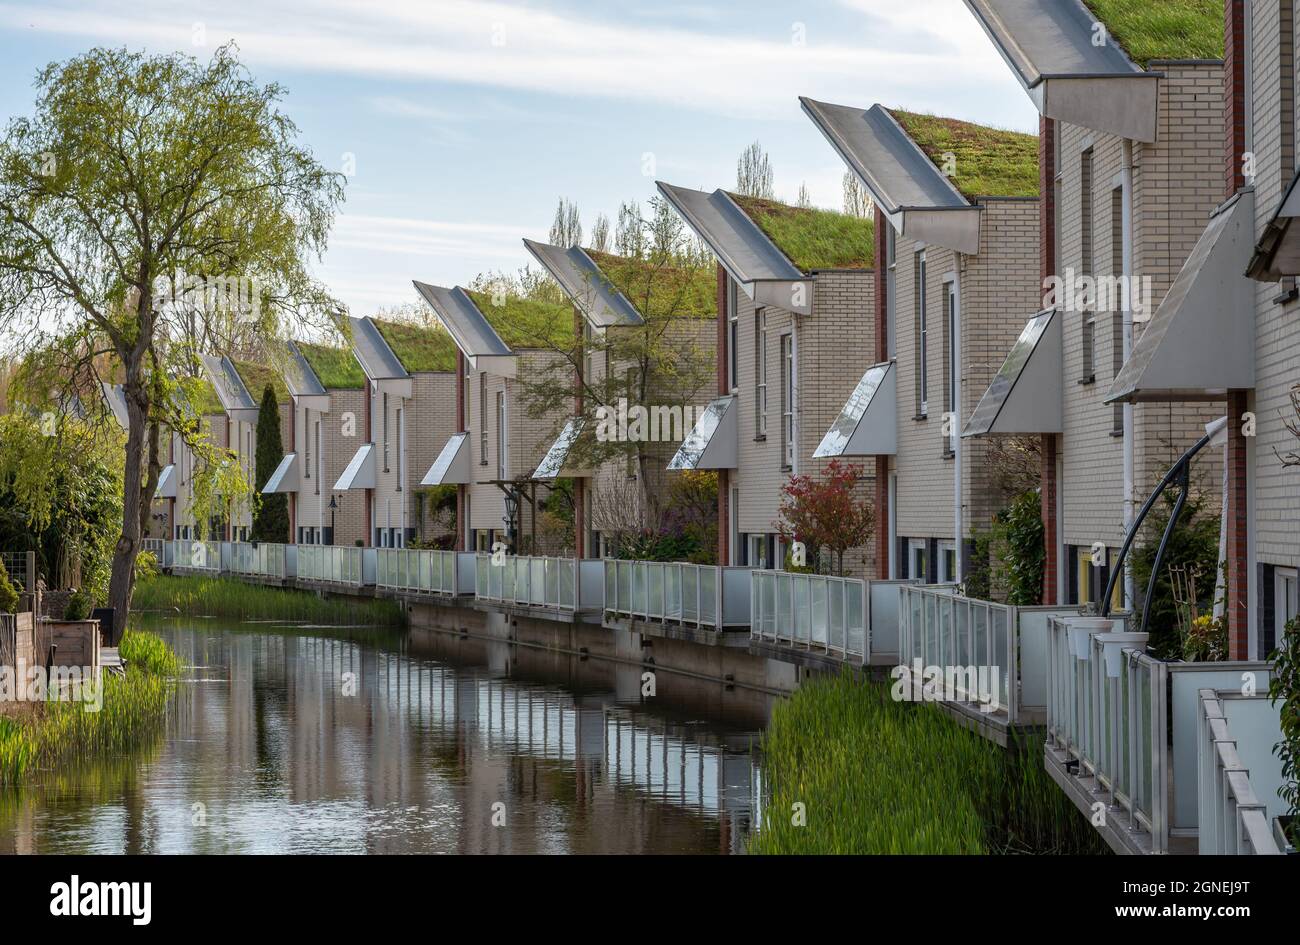 Dordrecht, South Holland, The Netherlands, 24.04.2021, Eco-friendly houses with green roofs in Stadspolder district Stock Photo